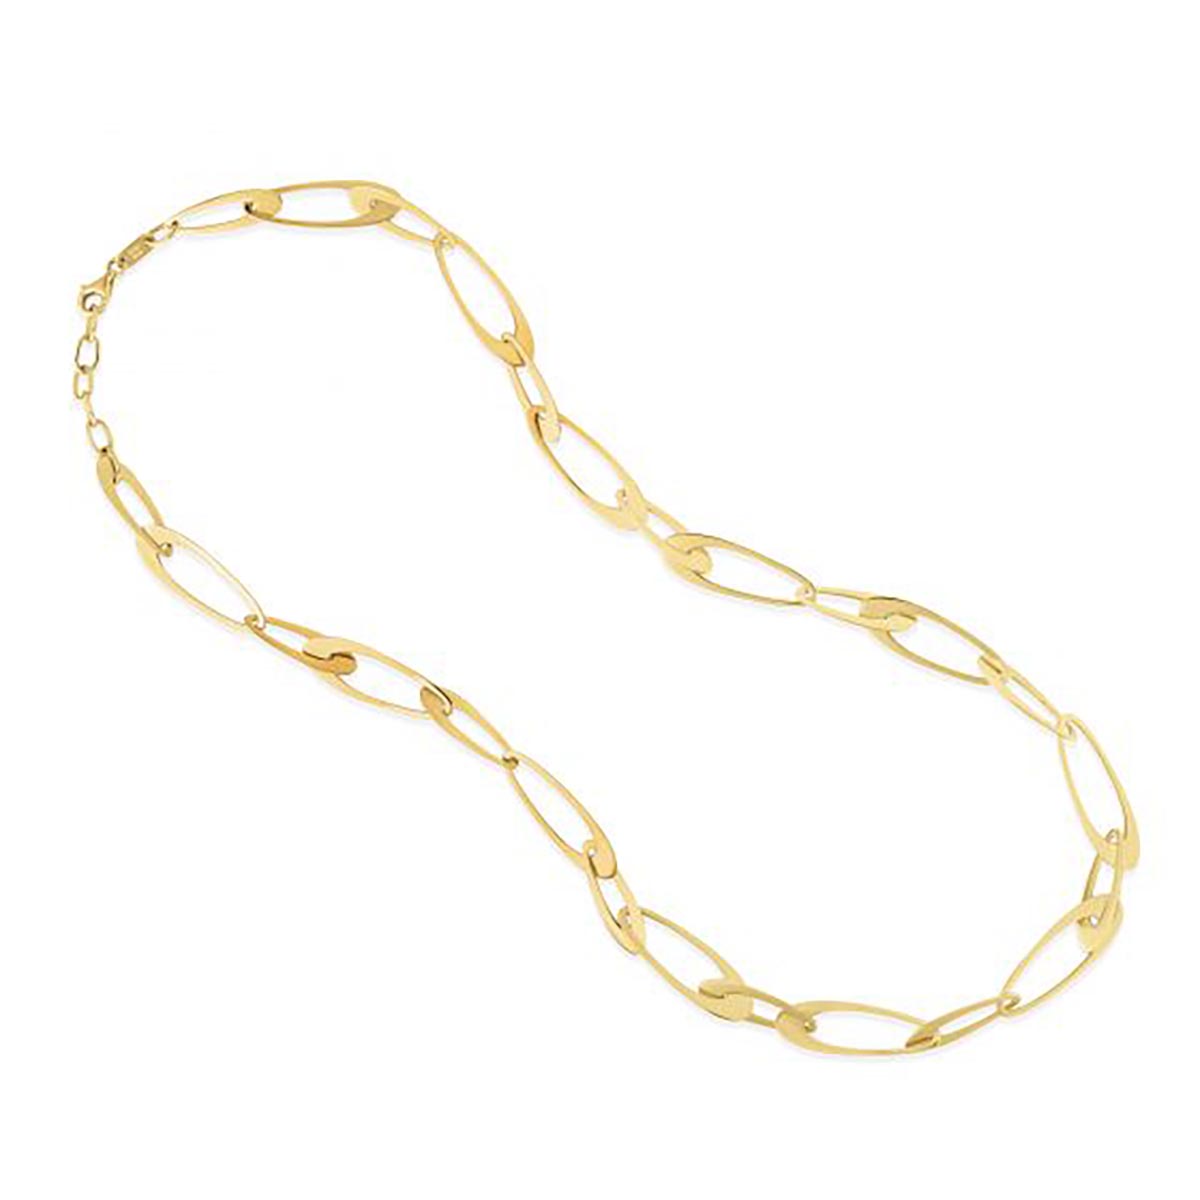 Oval Link Necklace in 14kt Yellow Gold